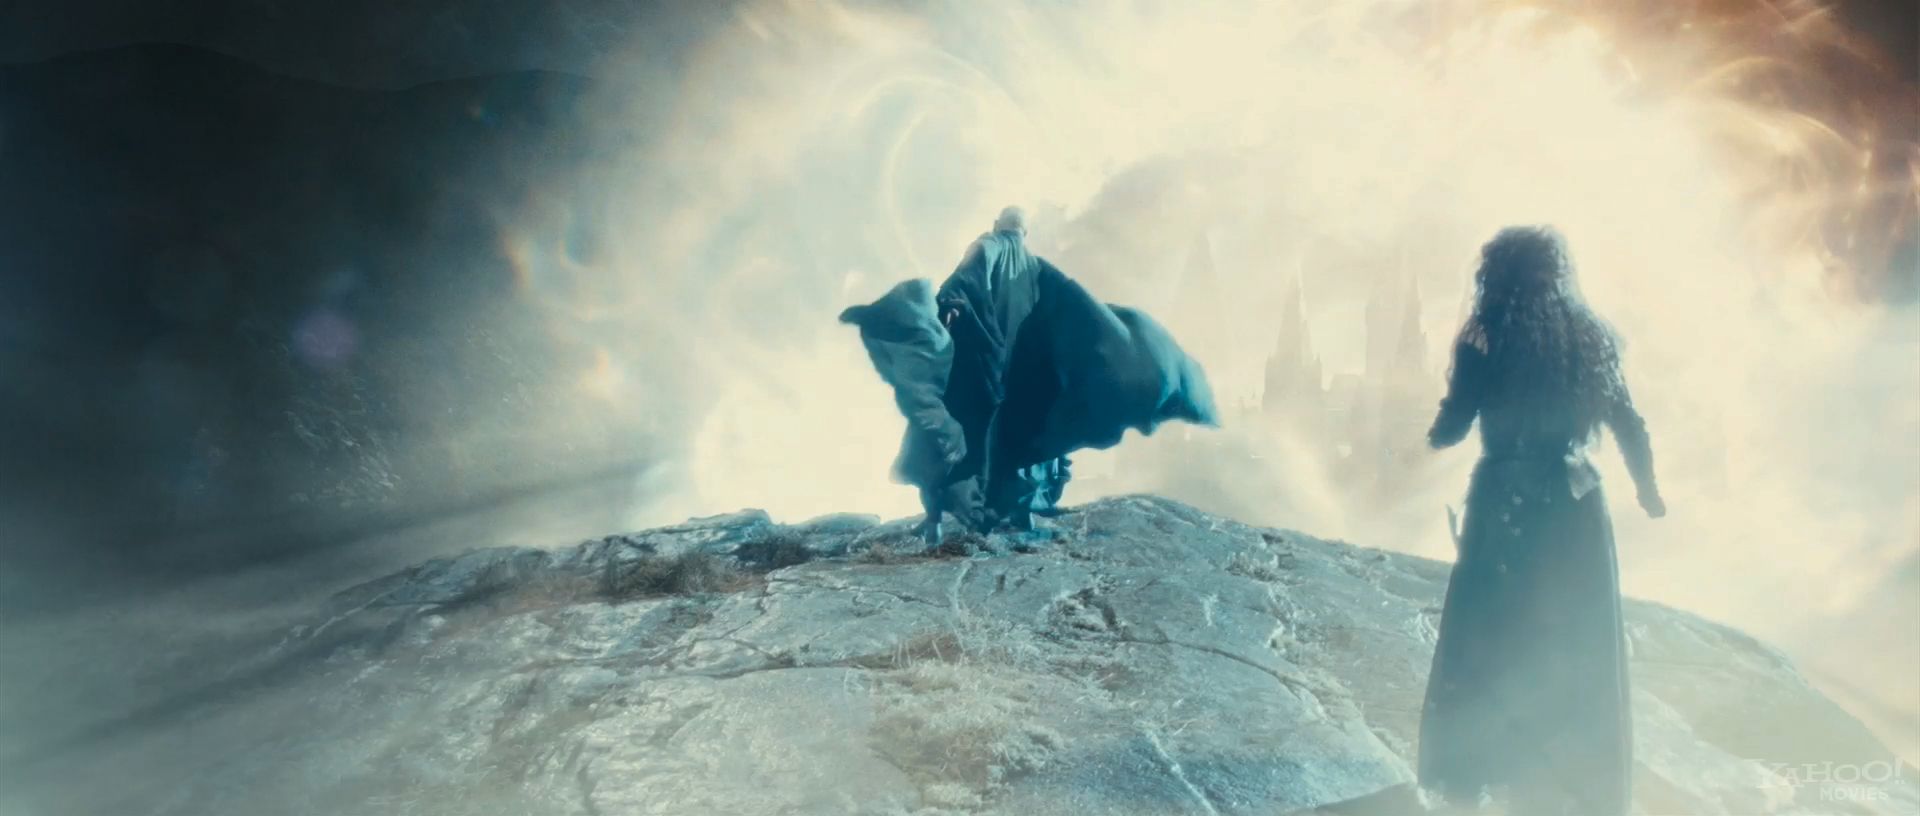 Harry Potter and the Deathly Hallow Trailer Still #7